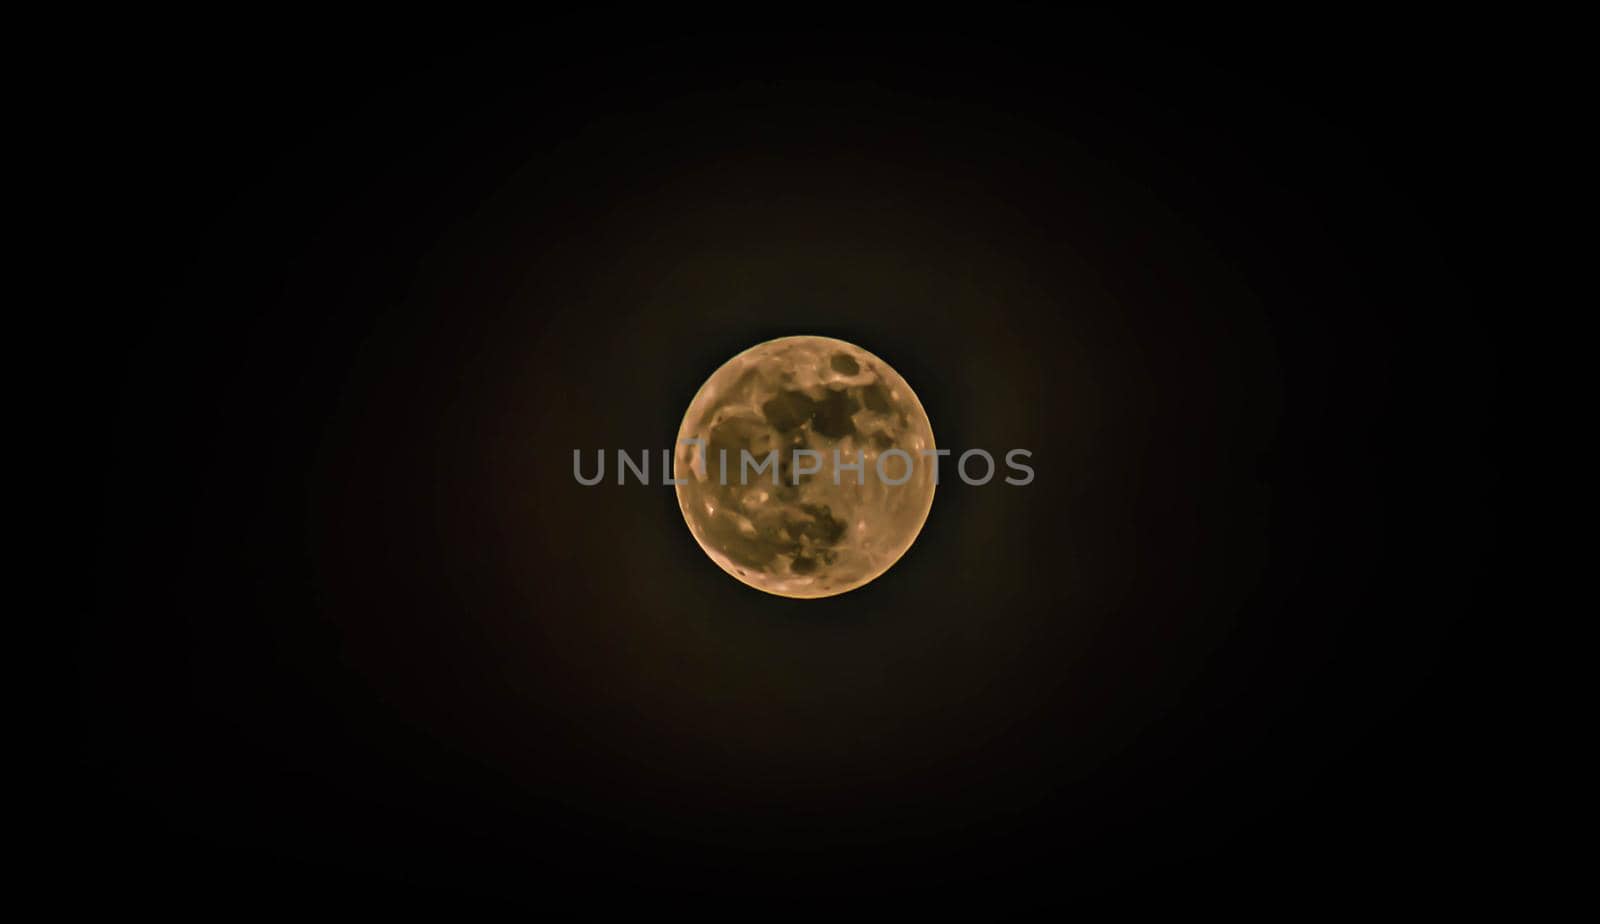 Halloween background .full moon dark cloud sky at night abstract science background